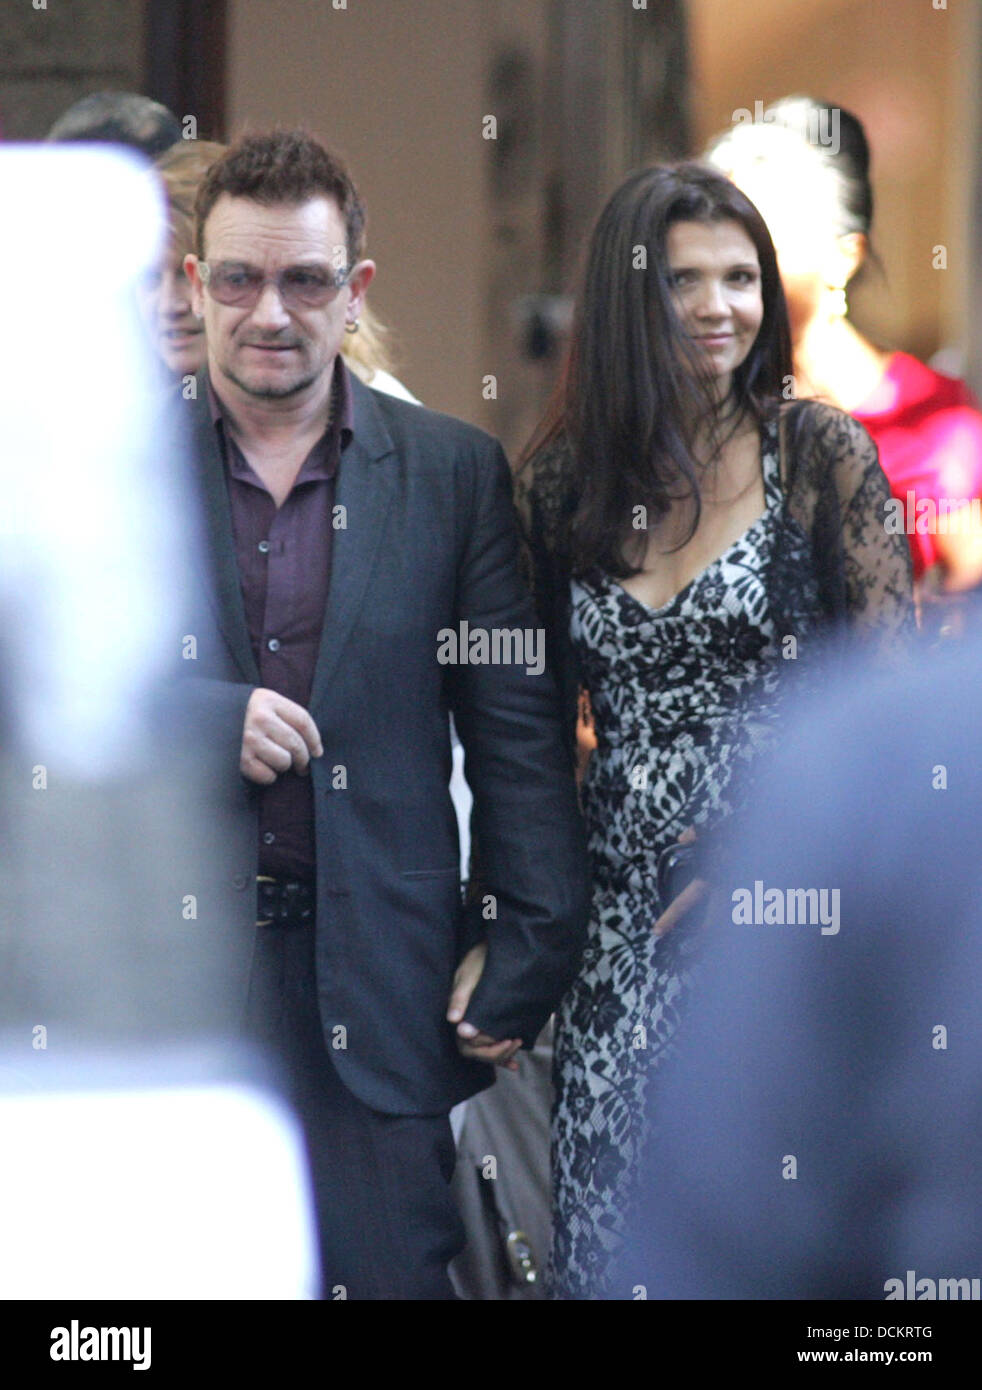 Bono and wife Ali Hewson  The book Launch of the authorised biography of Archbishop Desmond Tutu entitled 'Tutu: The Authorised Portrait' at St George's Cathedral  Cape Town, South Africa - 06.10.11  ***Not available in South Africa, Available for the rest of the world*** Stock Photo